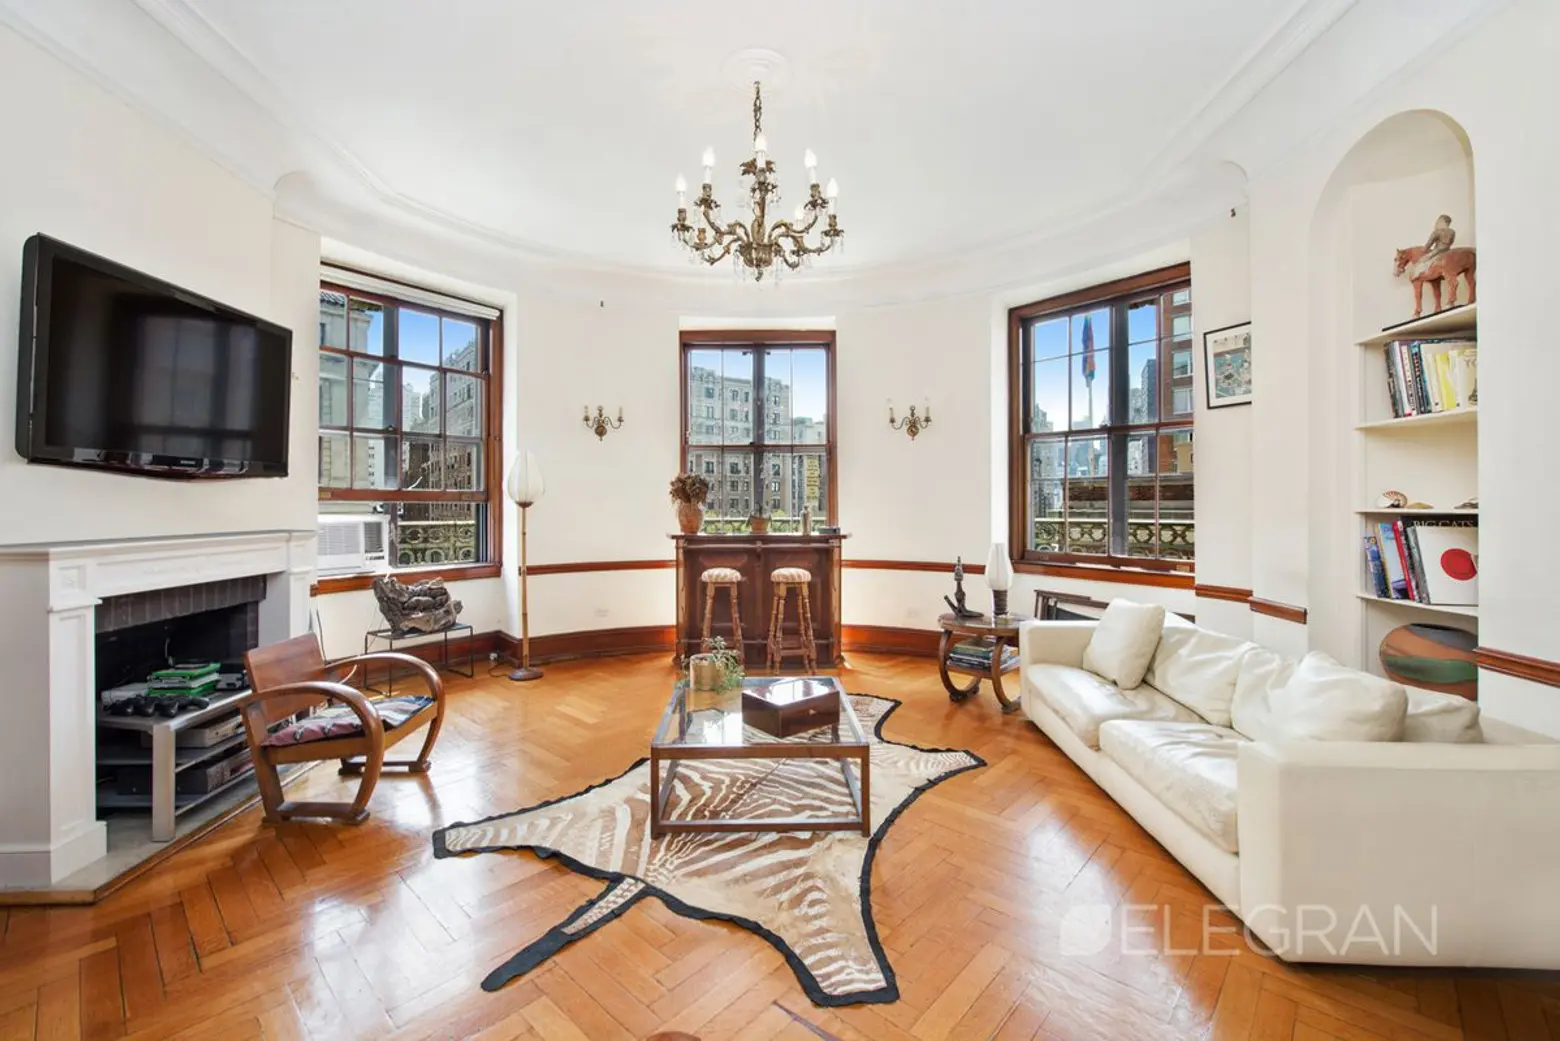 Rent a turreted 10-room wing of the Upper West Side’s famous Ansonia co-op for $21K a month